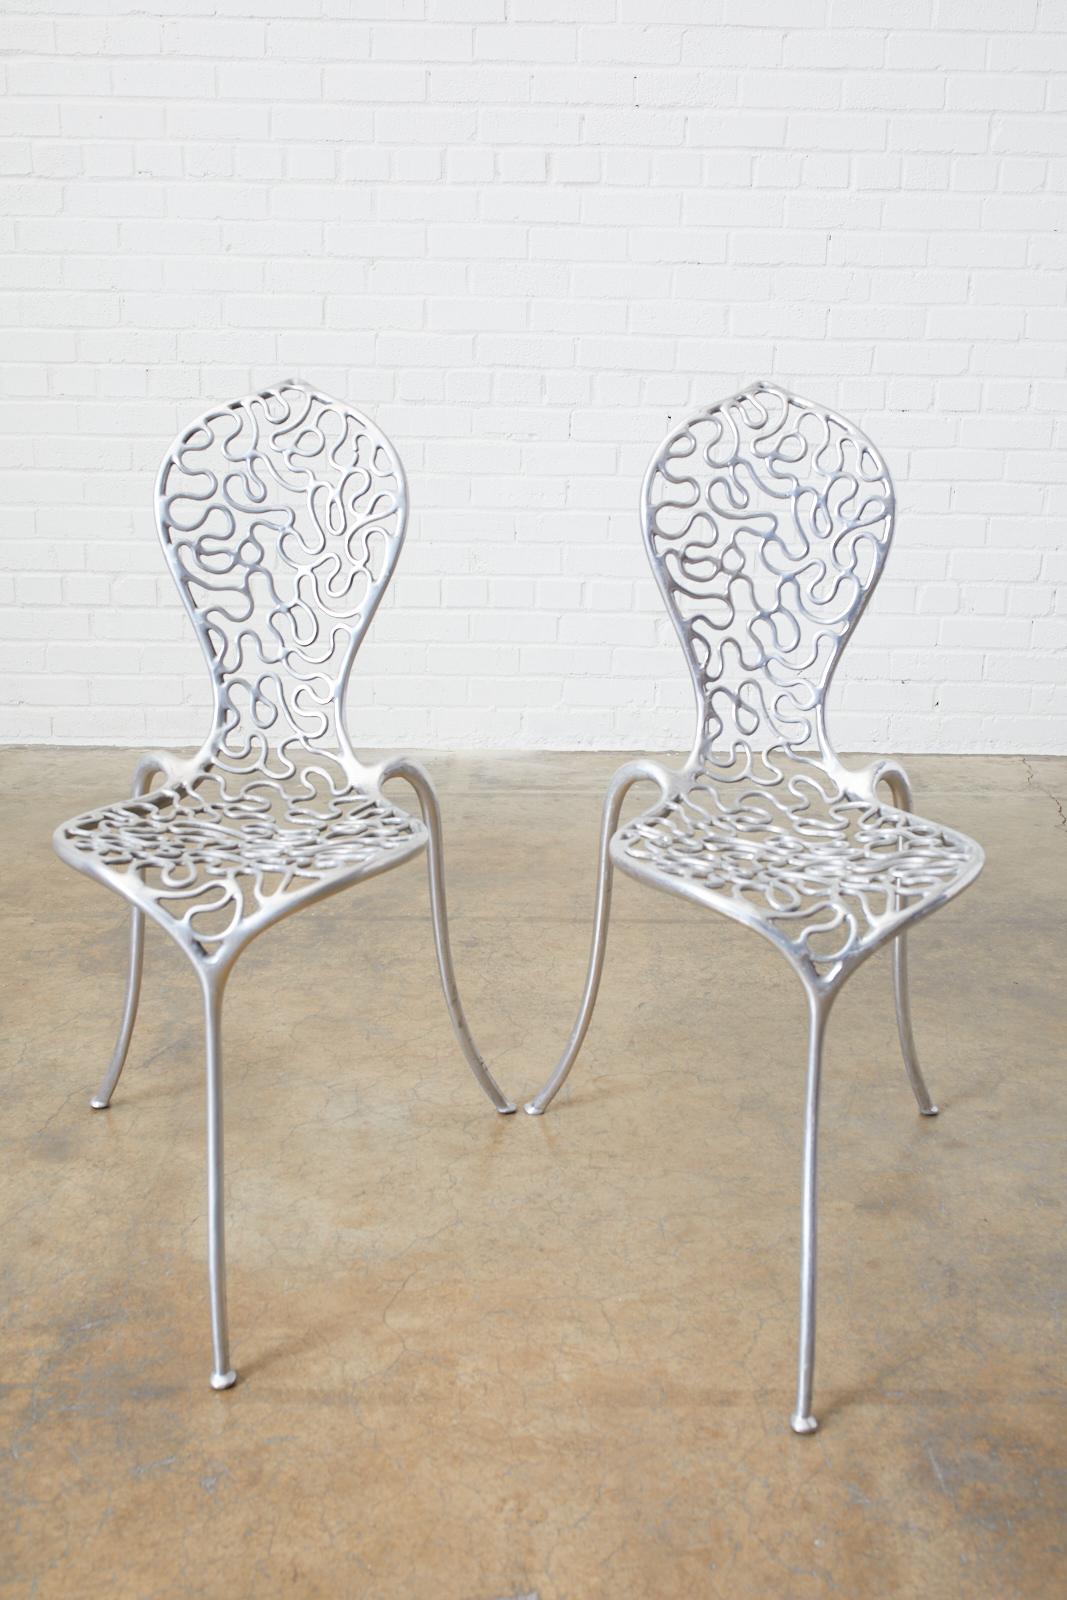 Rare set of five cast aluminum peanut chairs designed by Stephane Rondel (French). Rondel is a Parisian designer who now resides in New Zealand. These chairs were made in 1991 with a very limited production of 5,000 worldwide and many are on